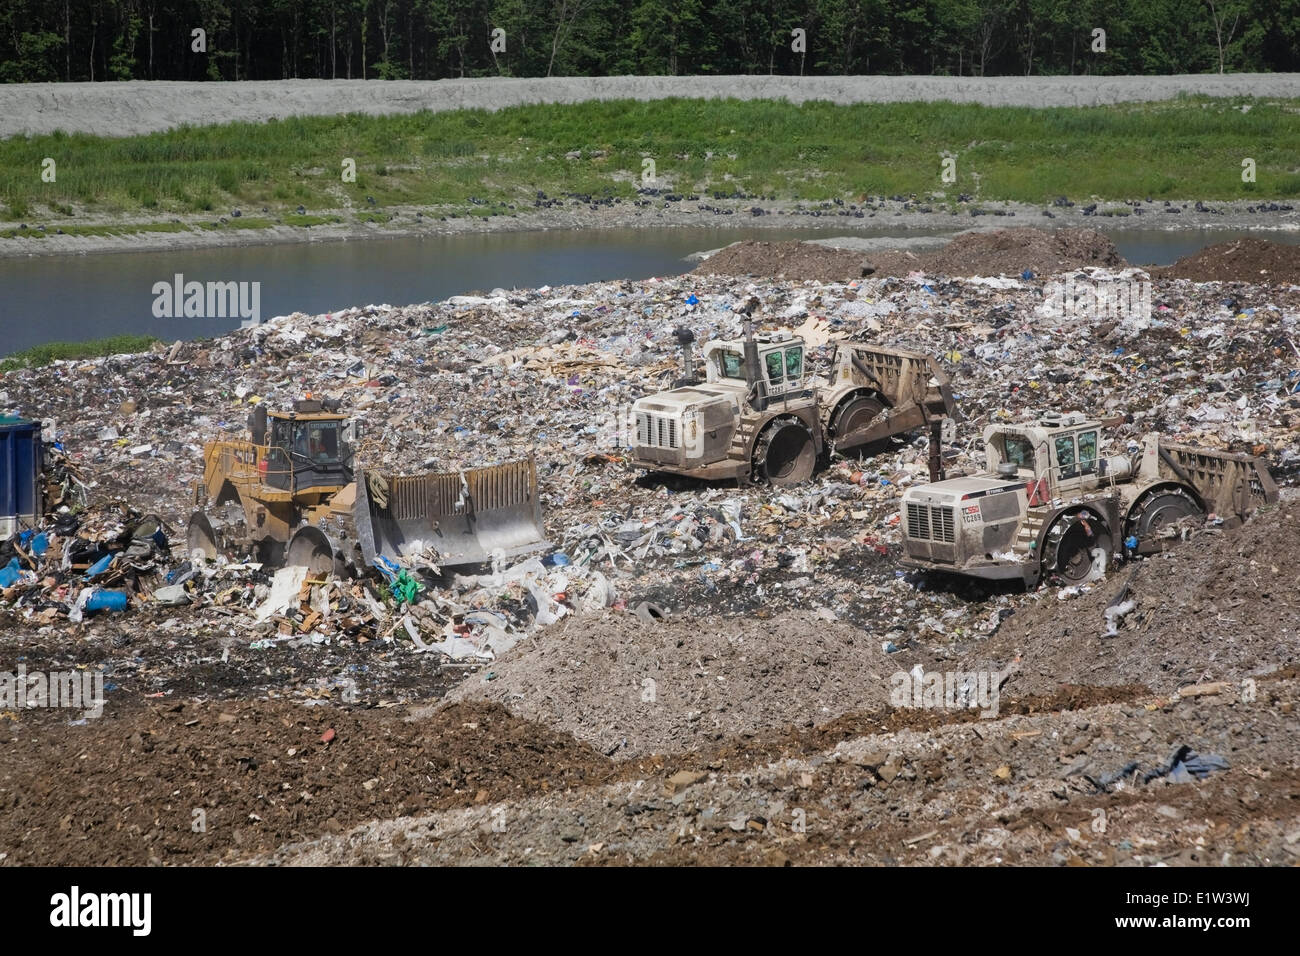 Heavy machinery spreading out and compacting discarded debris and trash at a waste management site, Quebec, Canada Stock Photo